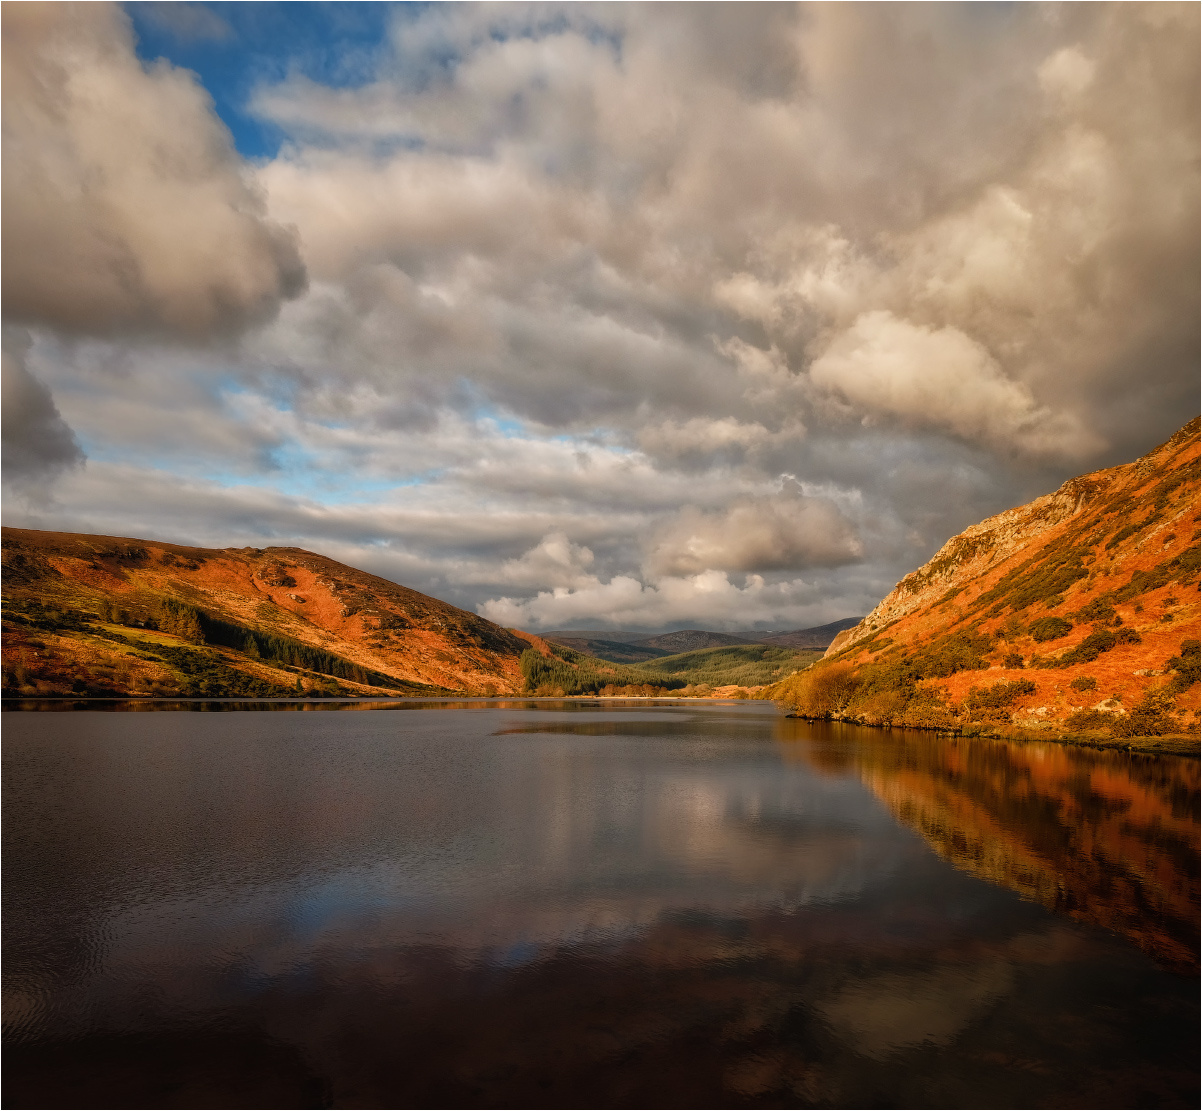 ...Lough Dan... ireland wicklow mountains lough lake water nature outdoors reflection landscape cloudscape mountain scape morning scenic scenery europe picturesque awe spectacular